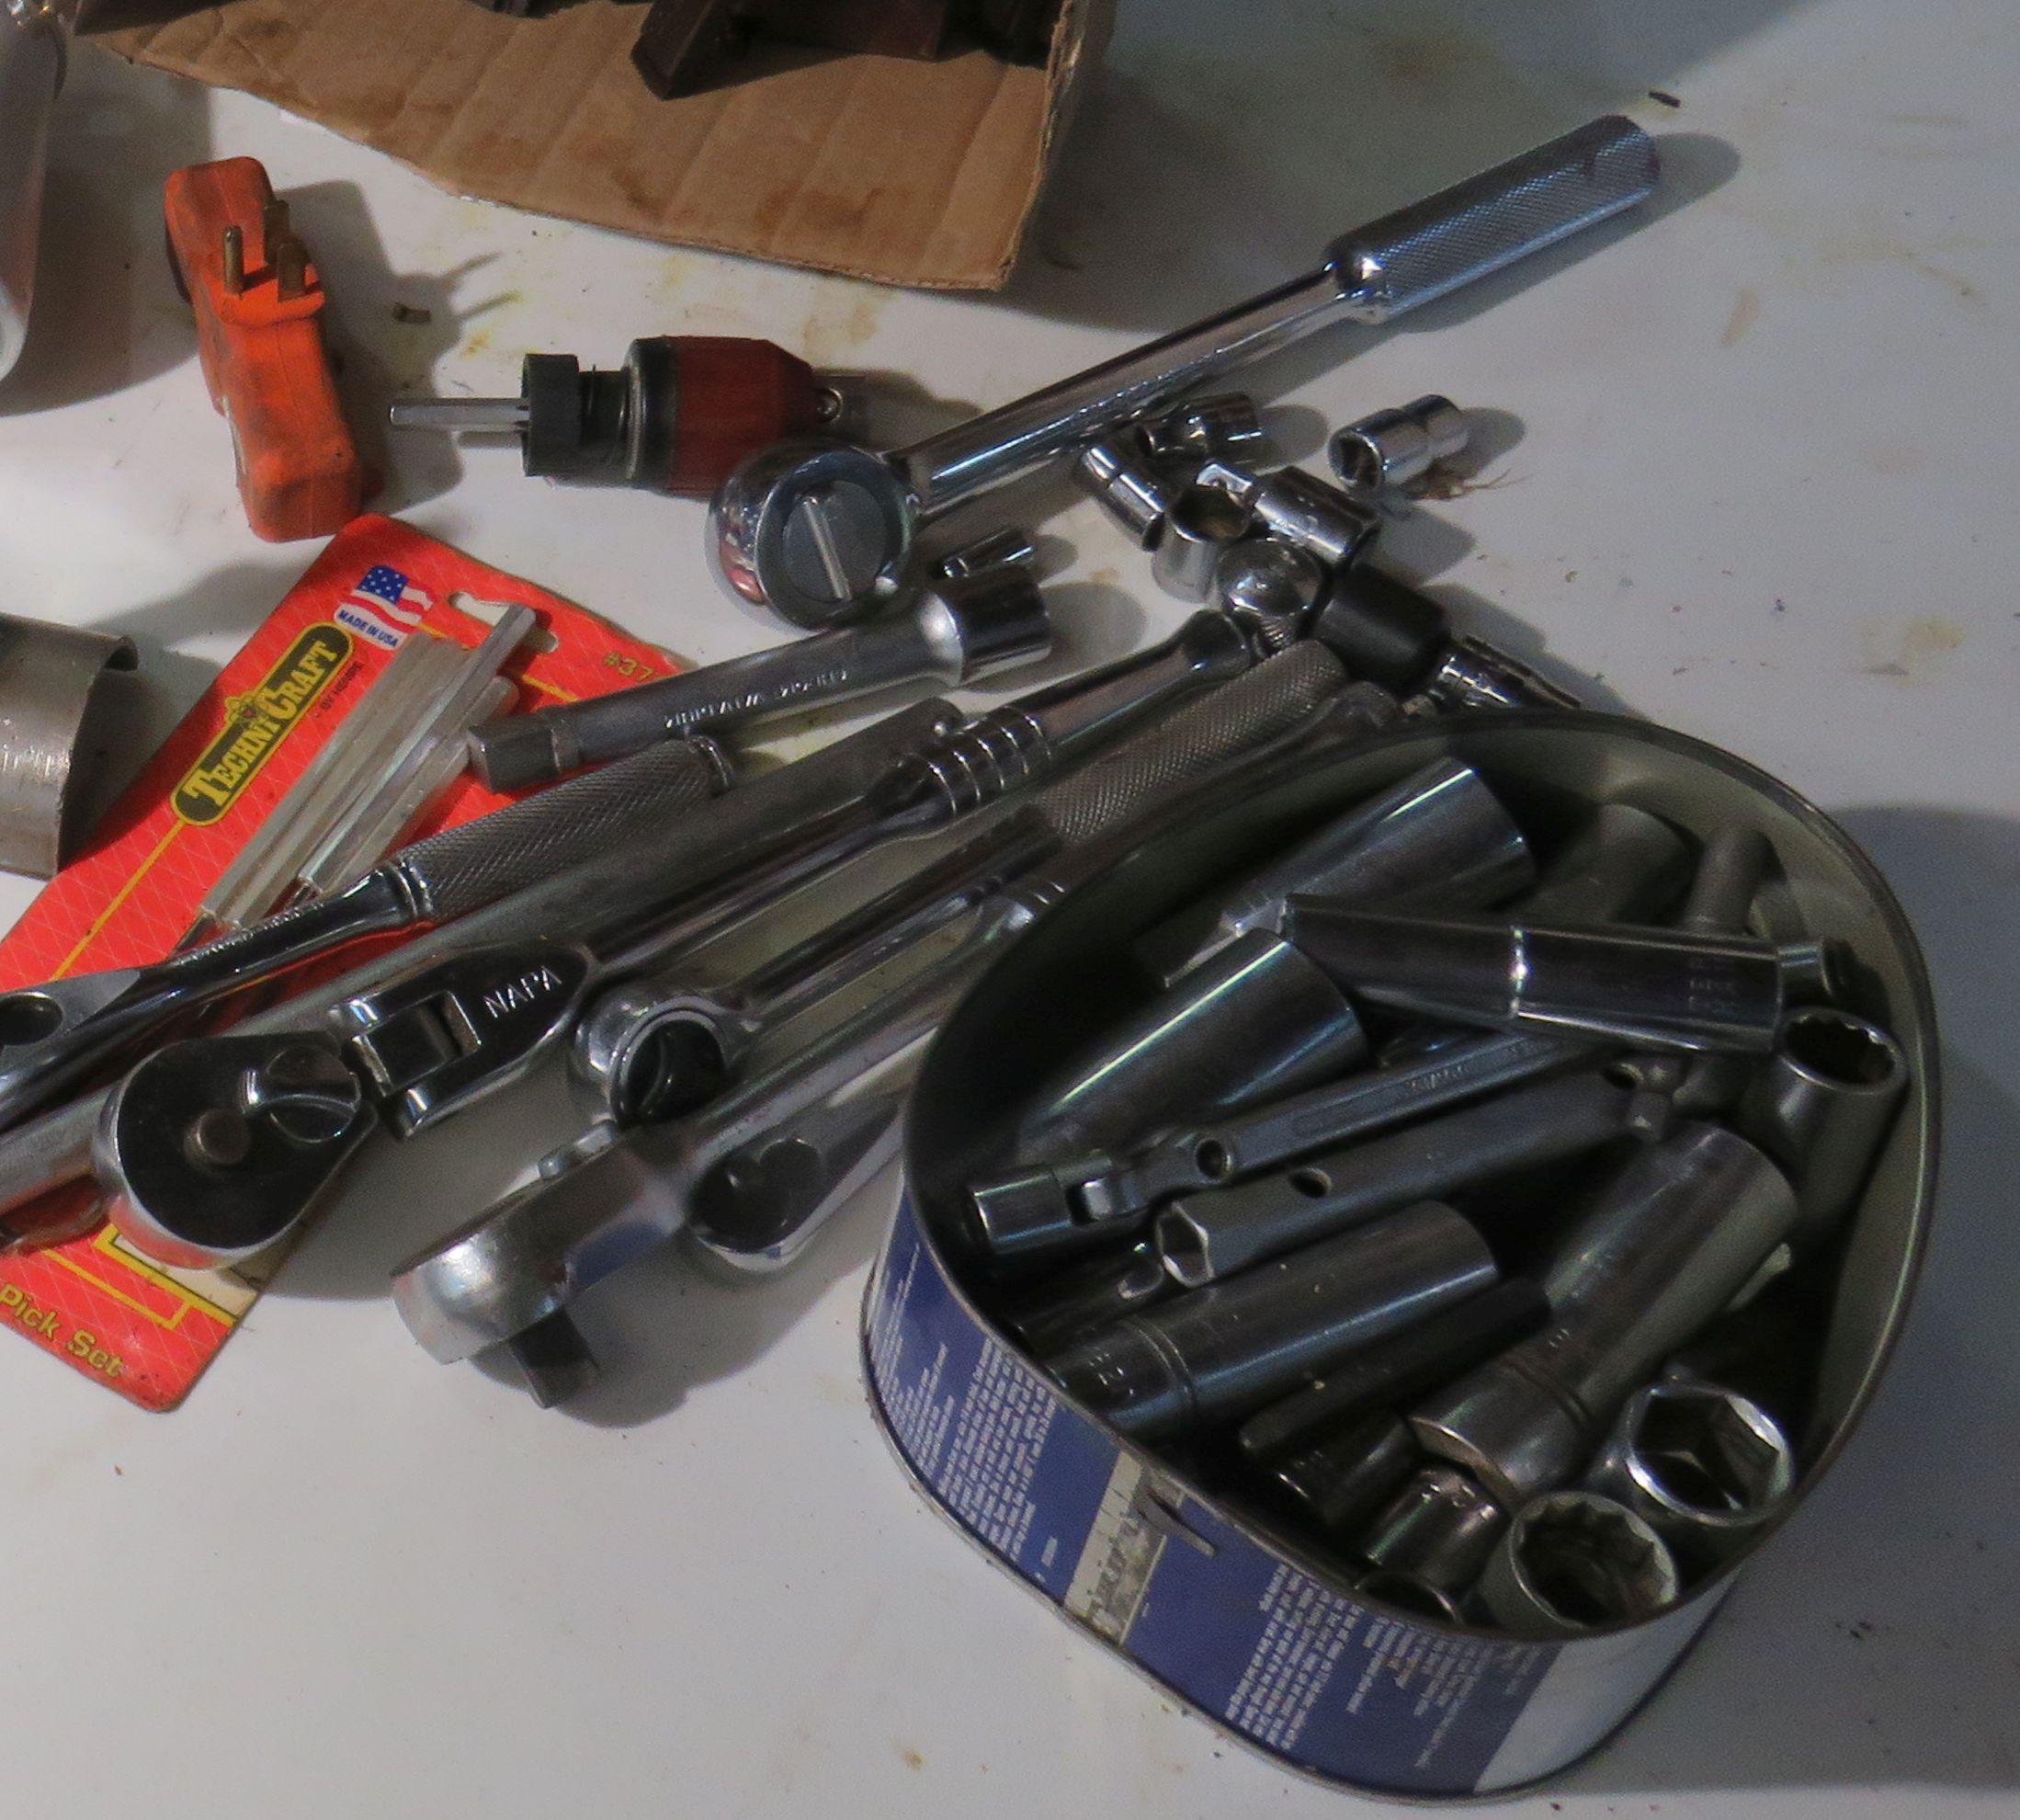 Assorted end wrenches, ratchets, wrenches, teeth for rigid pipe threaded, detail paint sprayer